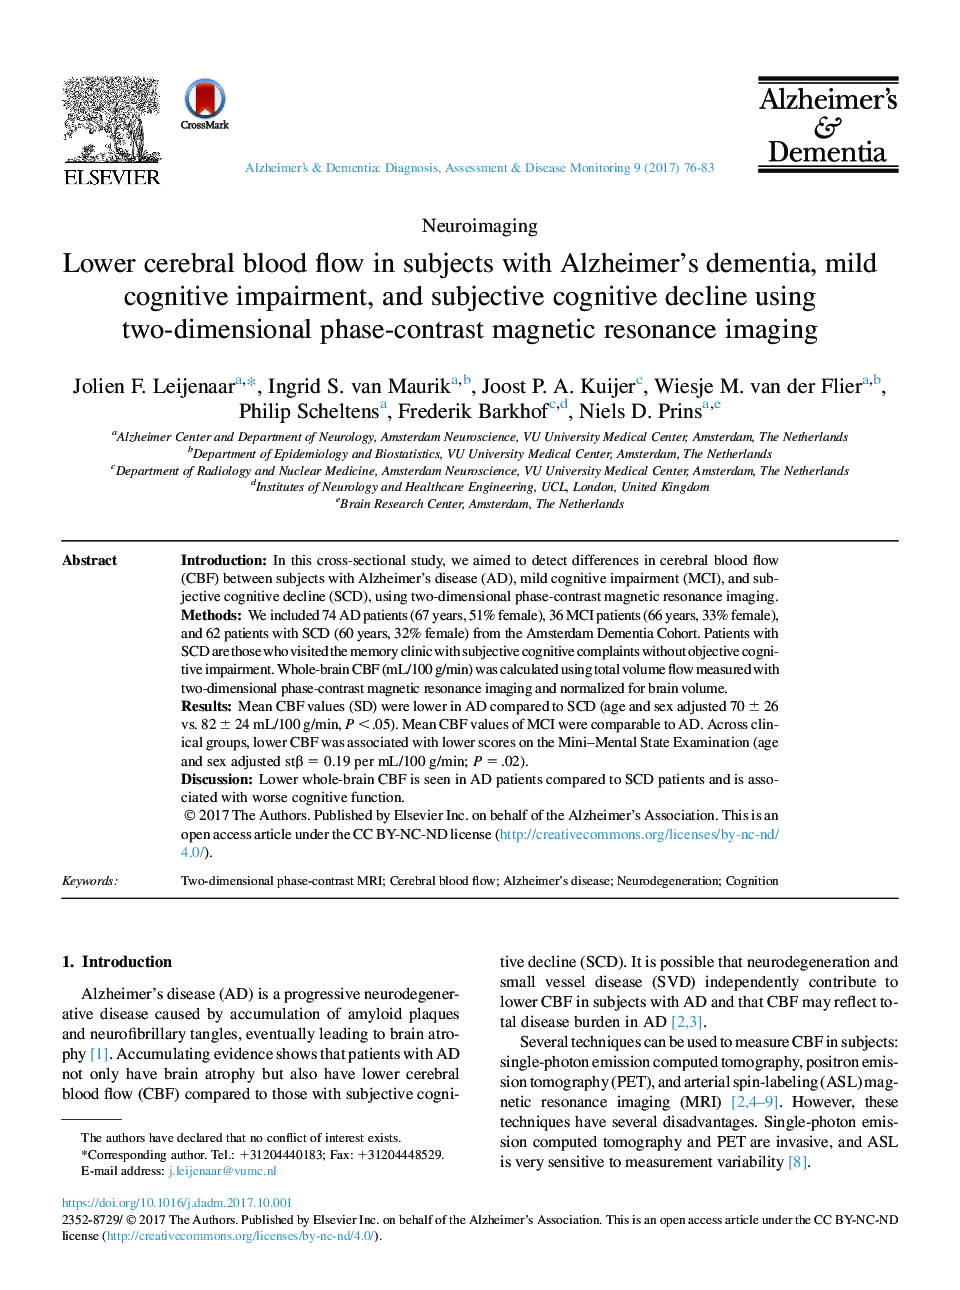 Lower cerebral blood flow in subjects with Alzheimer's dementia, mild cognitive impairment, and subjective cognitive decline using two-dimensional phase-contrast magnetic resonance imaging